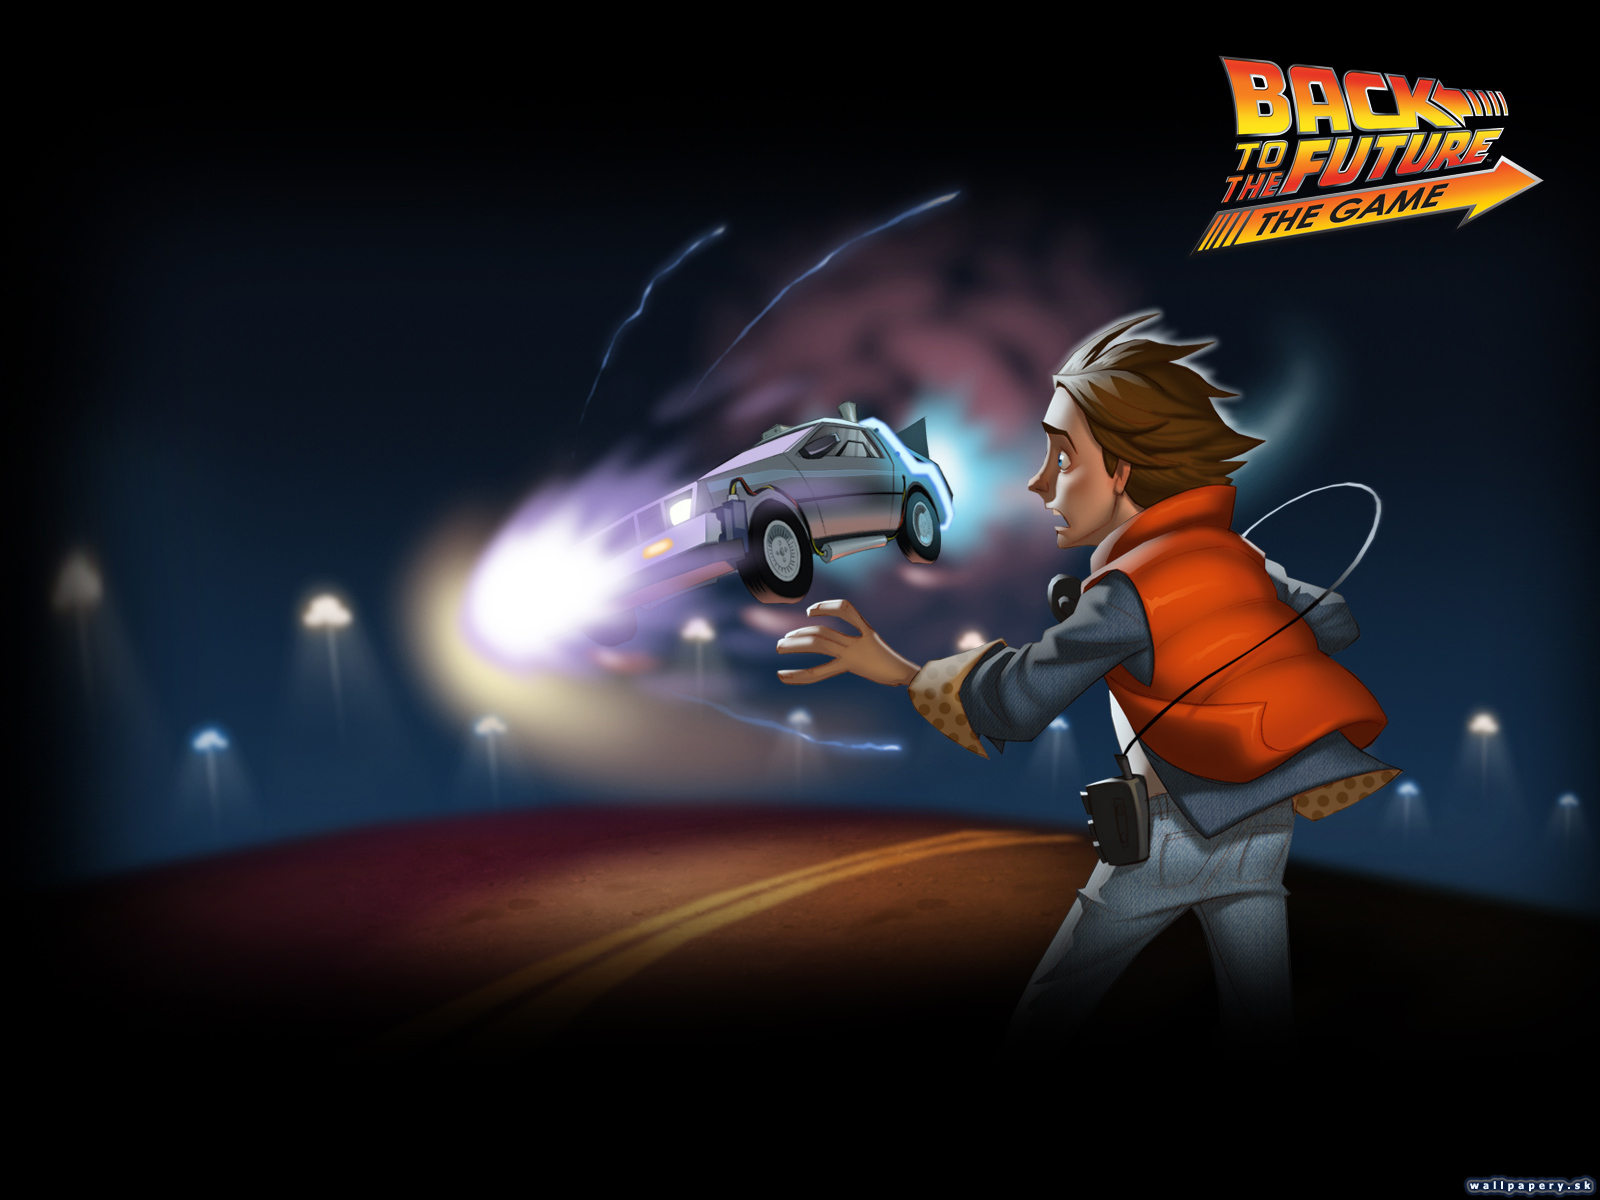 Back to the Future: The Game - It's About Time - wallpaper 2